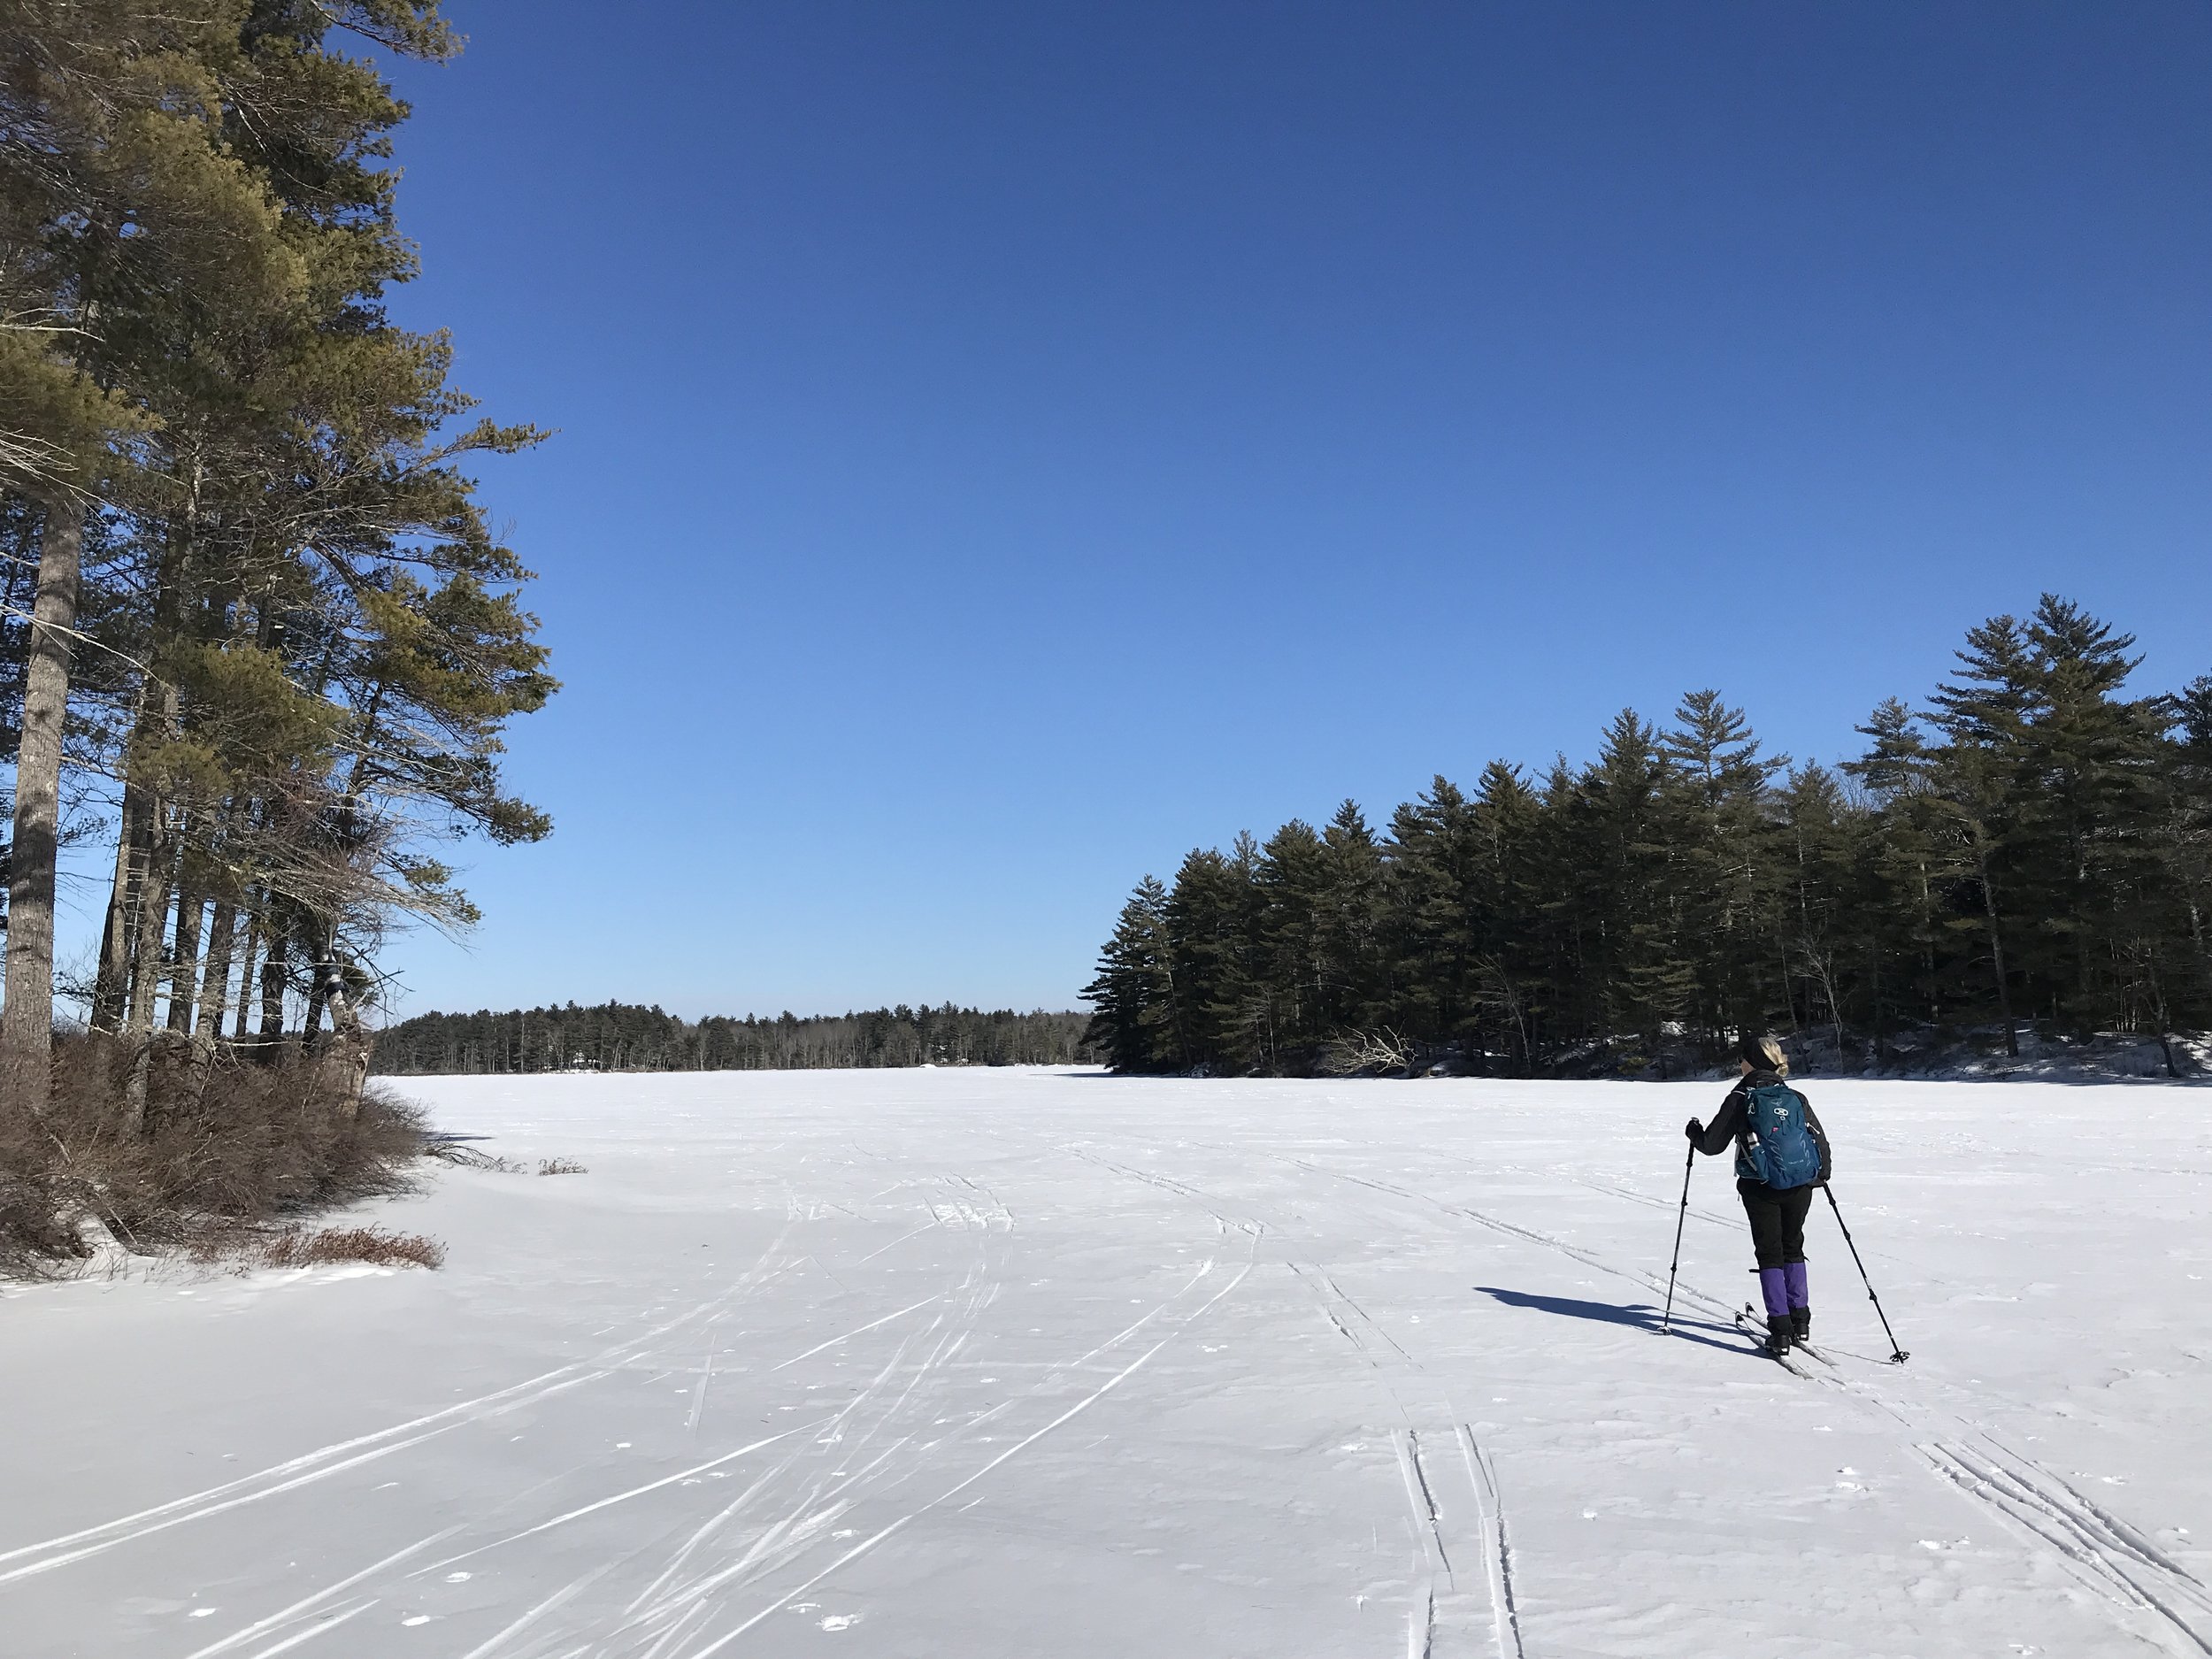 Making tracks across the frozen expanse of a remote pond, like Little Dyer Pond at Hidden Valley Nature Center pictured here, is one of the true joys of winter adventuring.